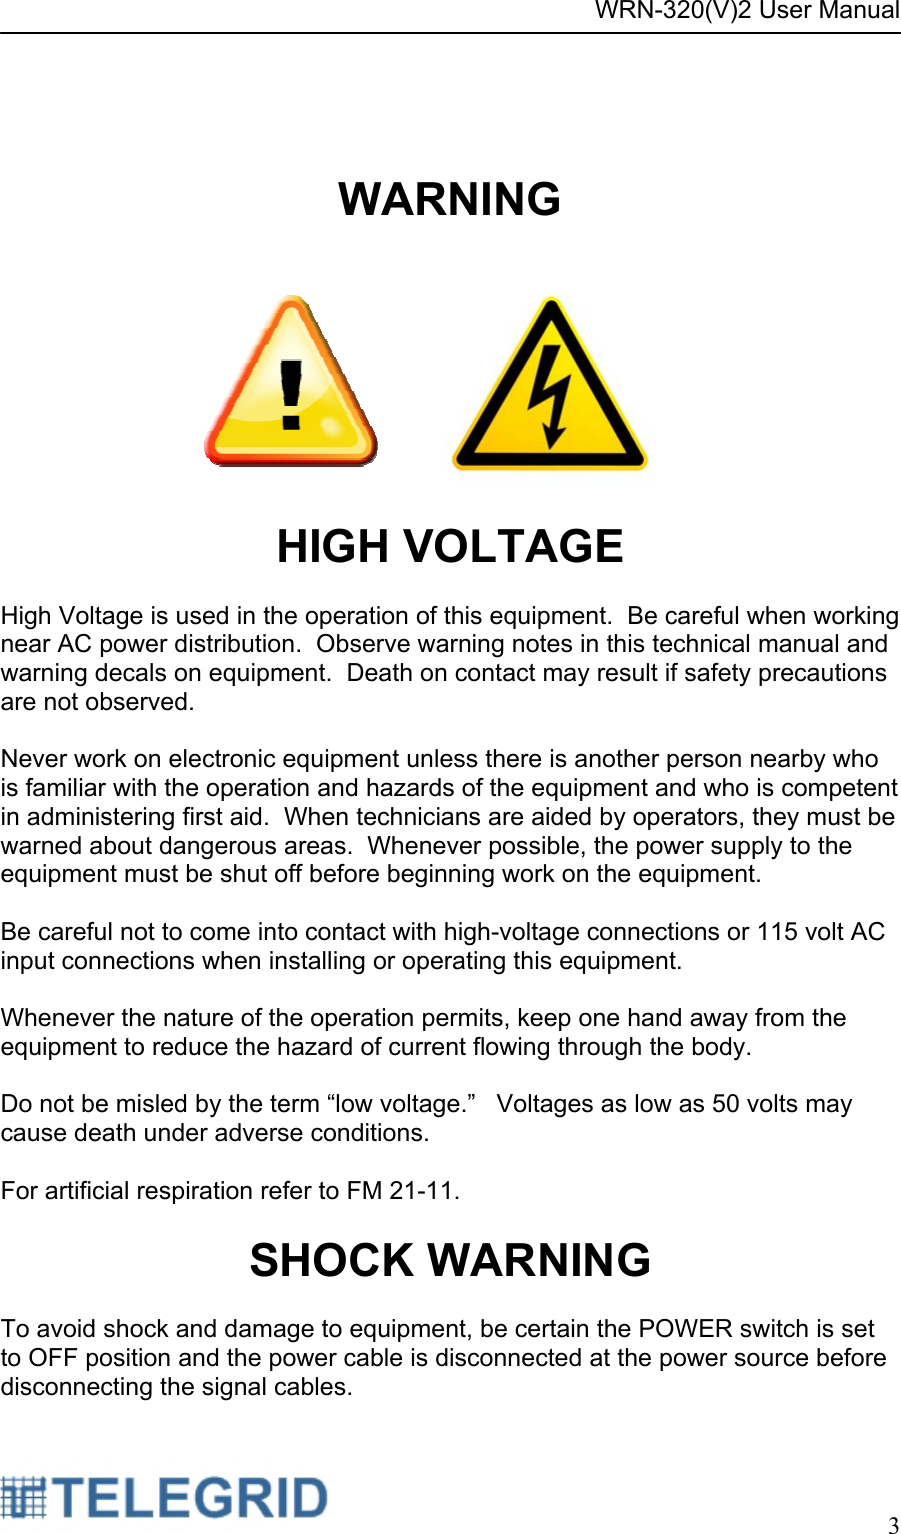 WRN-320(V)2 User Manual     3     WARNING    HIGH VOLTAGE  High Voltage is used in the operation of this equipment.  Be careful when working near AC power distribution.  Observe warning notes in this technical manual and warning decals on equipment.  Death on contact may result if safety precautions are not observed.  Never work on electronic equipment unless there is another person nearby who is familiar with the operation and hazards of the equipment and who is competent in administering first aid.  When technicians are aided by operators, they must be warned about dangerous areas.  Whenever possible, the power supply to the equipment must be shut off before beginning work on the equipment.  Be careful not to come into contact with high-voltage connections or 115 volt AC input connections when installing or operating this equipment.  Whenever the nature of the operation permits, keep one hand away from the equipment to reduce the hazard of current flowing through the body.  Do not be misled by the term “low voltage.”   Voltages as low as 50 volts may cause death under adverse conditions.  For artificial respiration refer to FM 21-11.  SHOCK WARNING  To avoid shock and damage to equipment, be certain the POWER switch is set to OFF position and the power cable is disconnected at the power source before disconnecting the signal cables. 